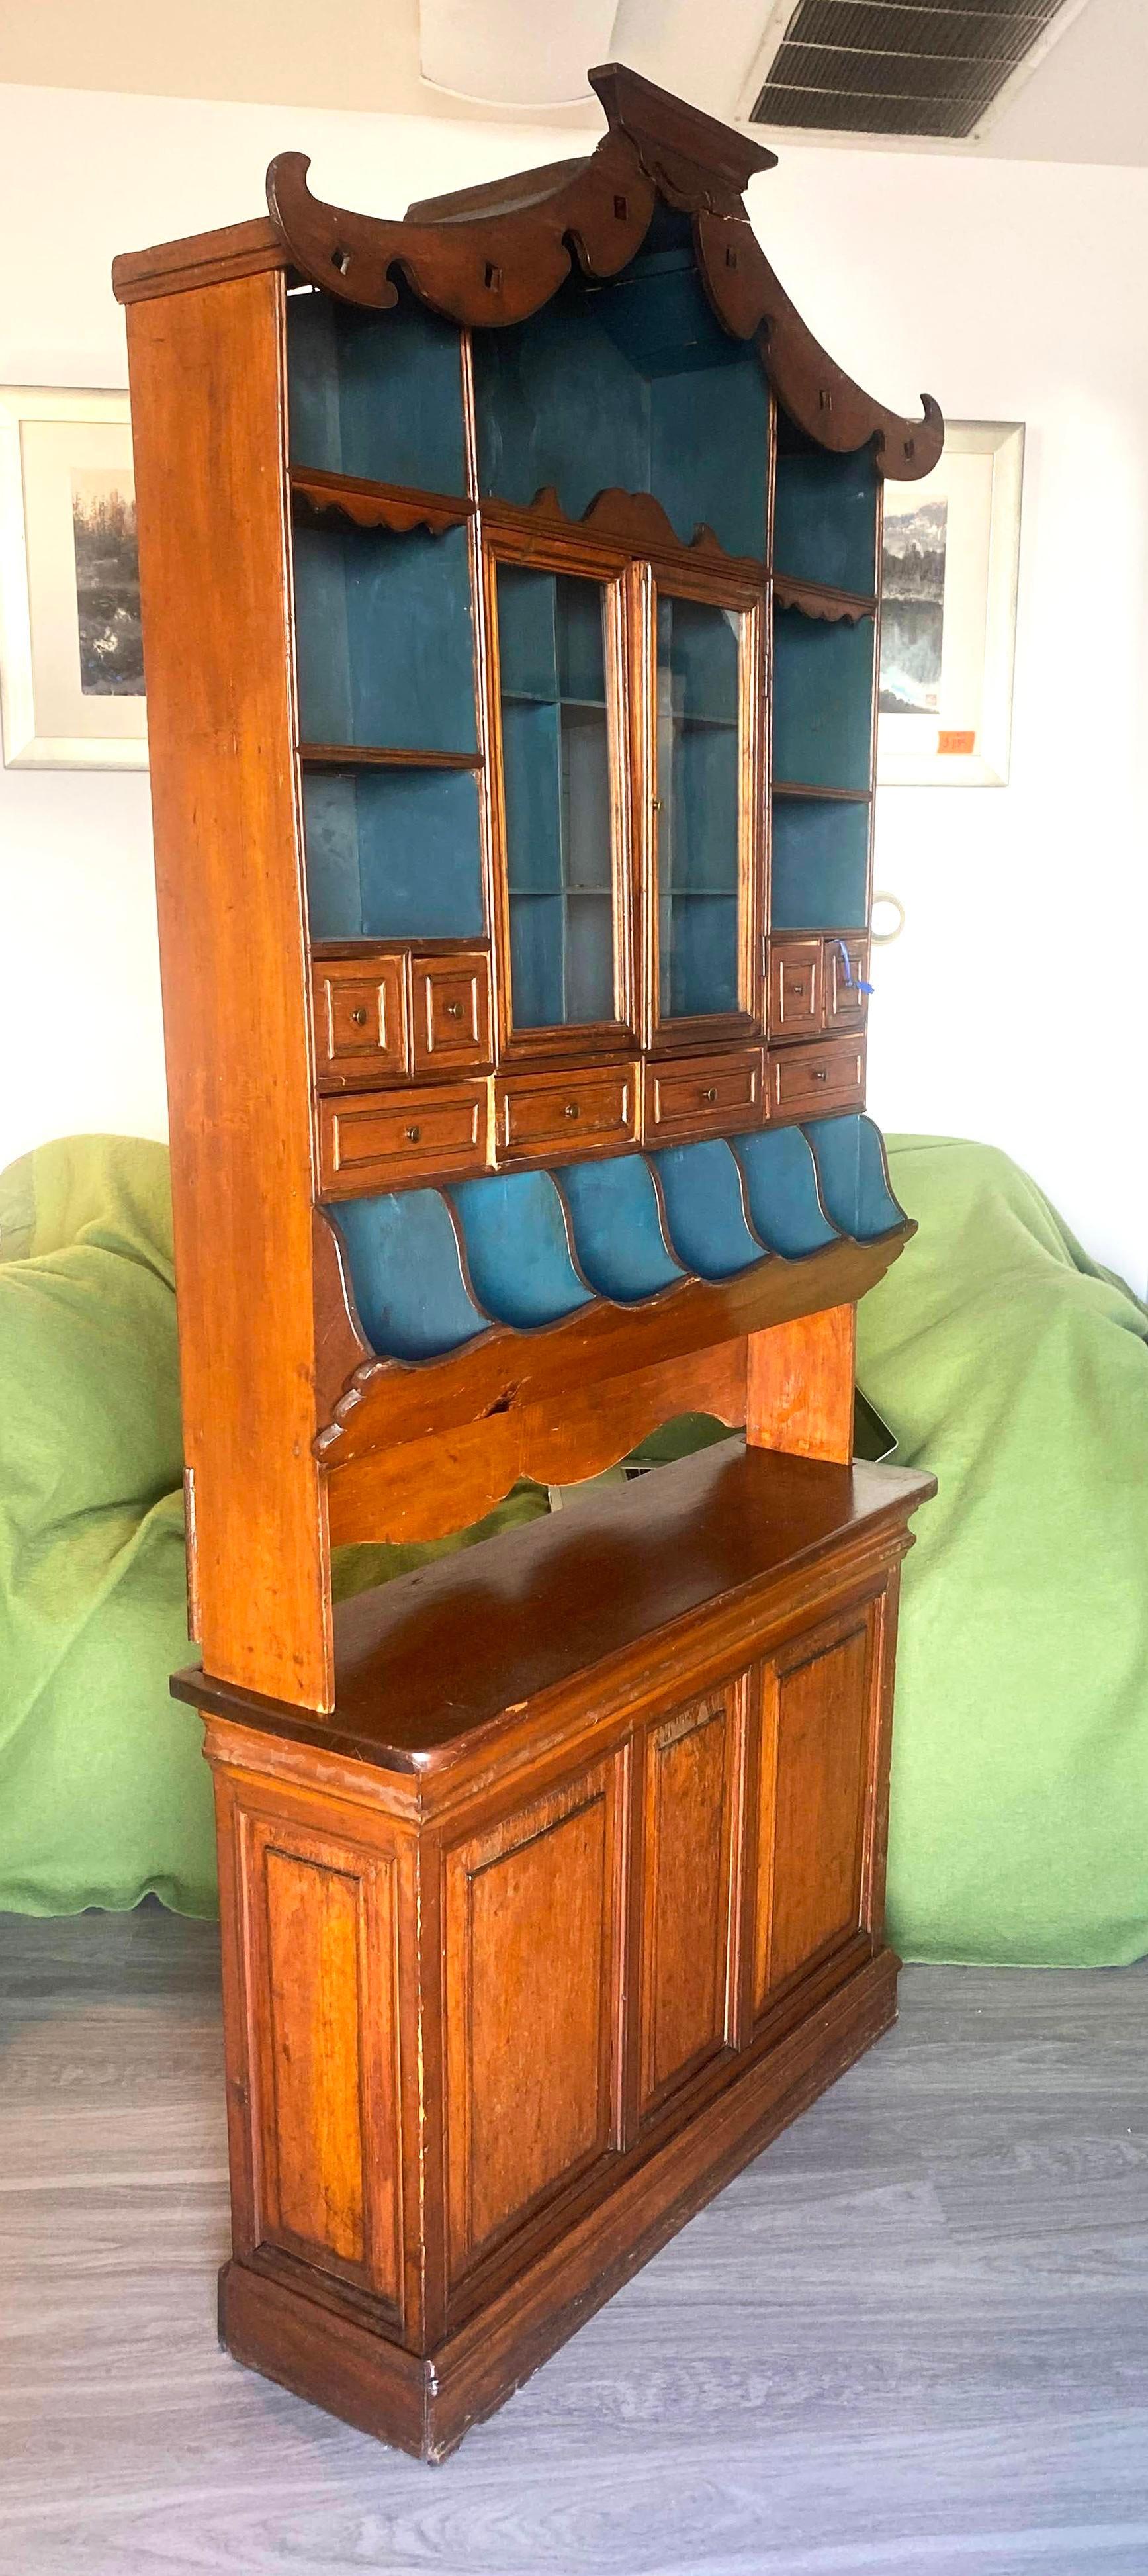 Vintage Chinese Chippendale display cabinet hutch with blue painted interior shelves. The detailing on this large cabinet is primitive yet classically elegant and tasteful incorporating the best traditional designs elements from both the East and